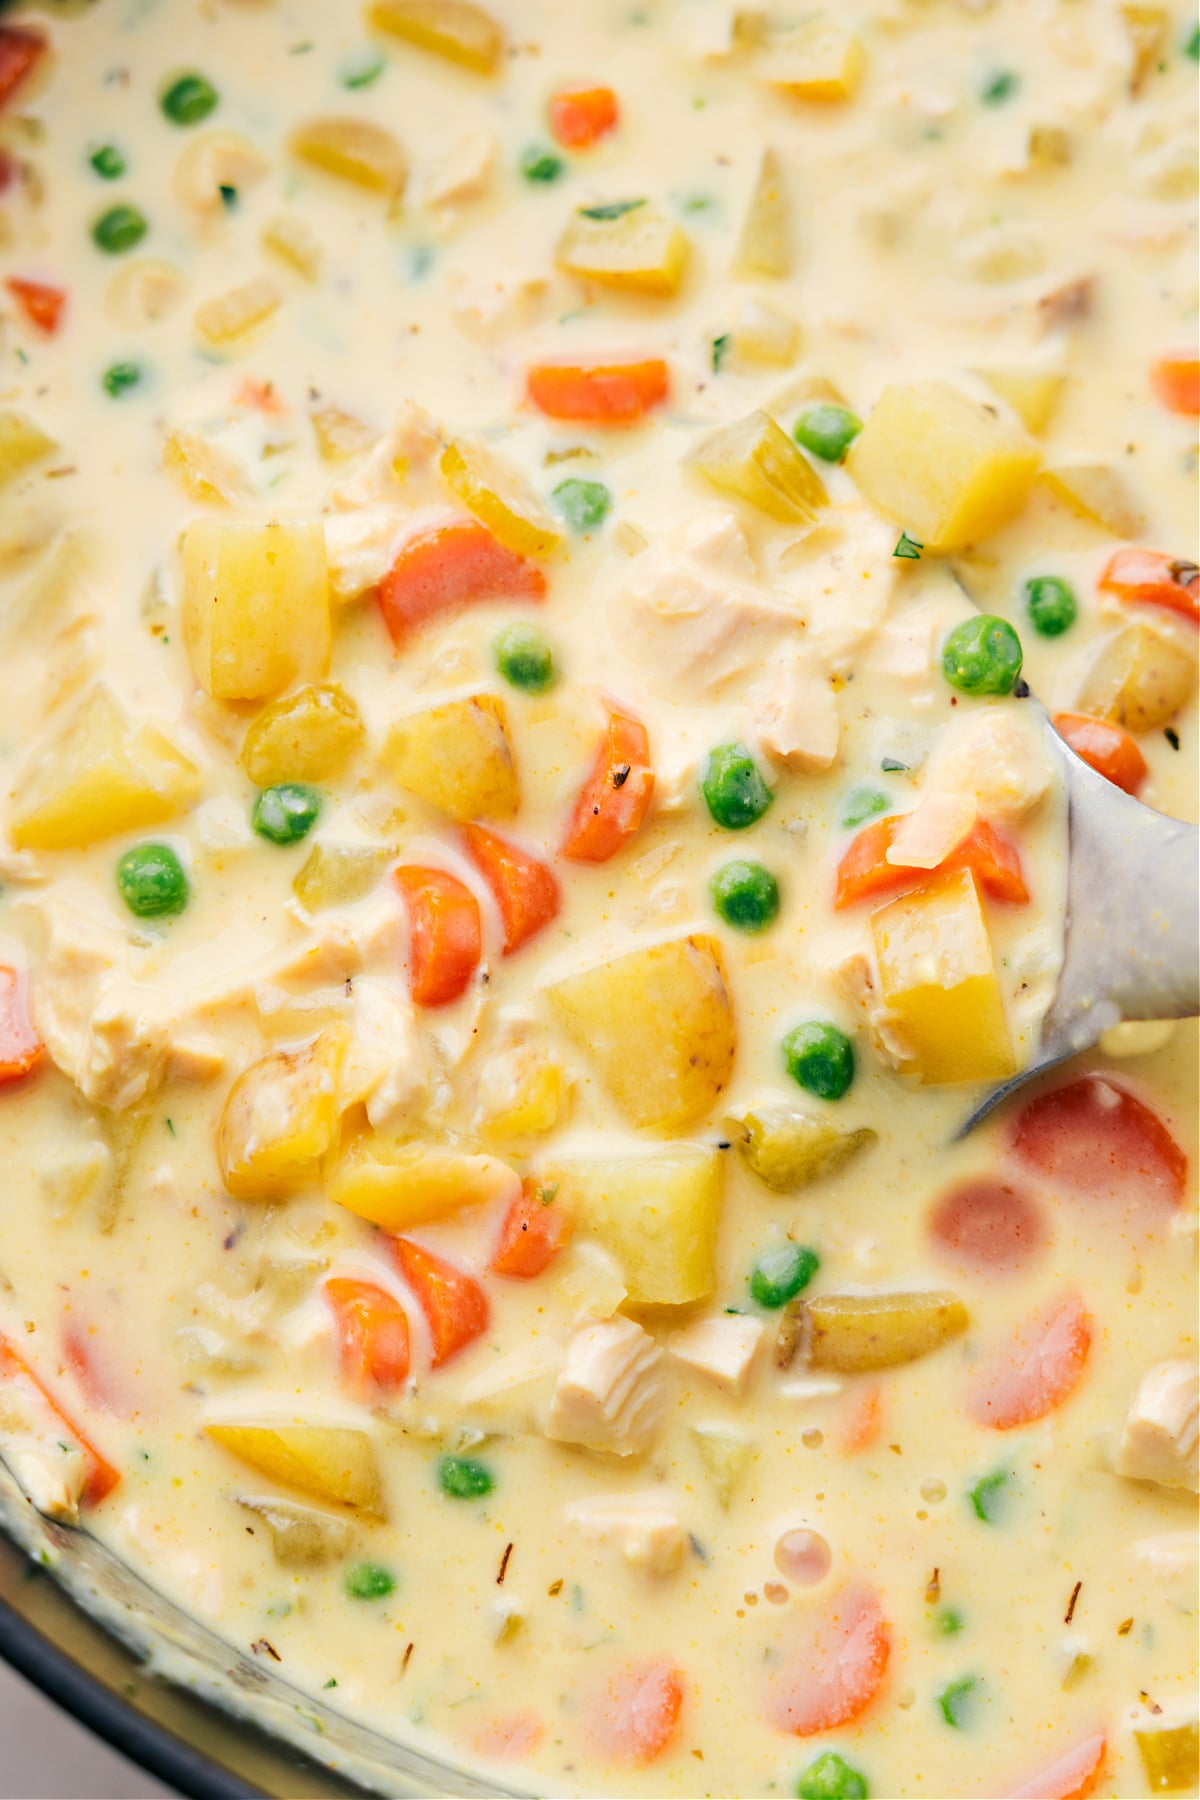 The finished warm and delicious curry chicken chowder, packed full of flavor, vegetables, and chicken, creating the perfect meal.